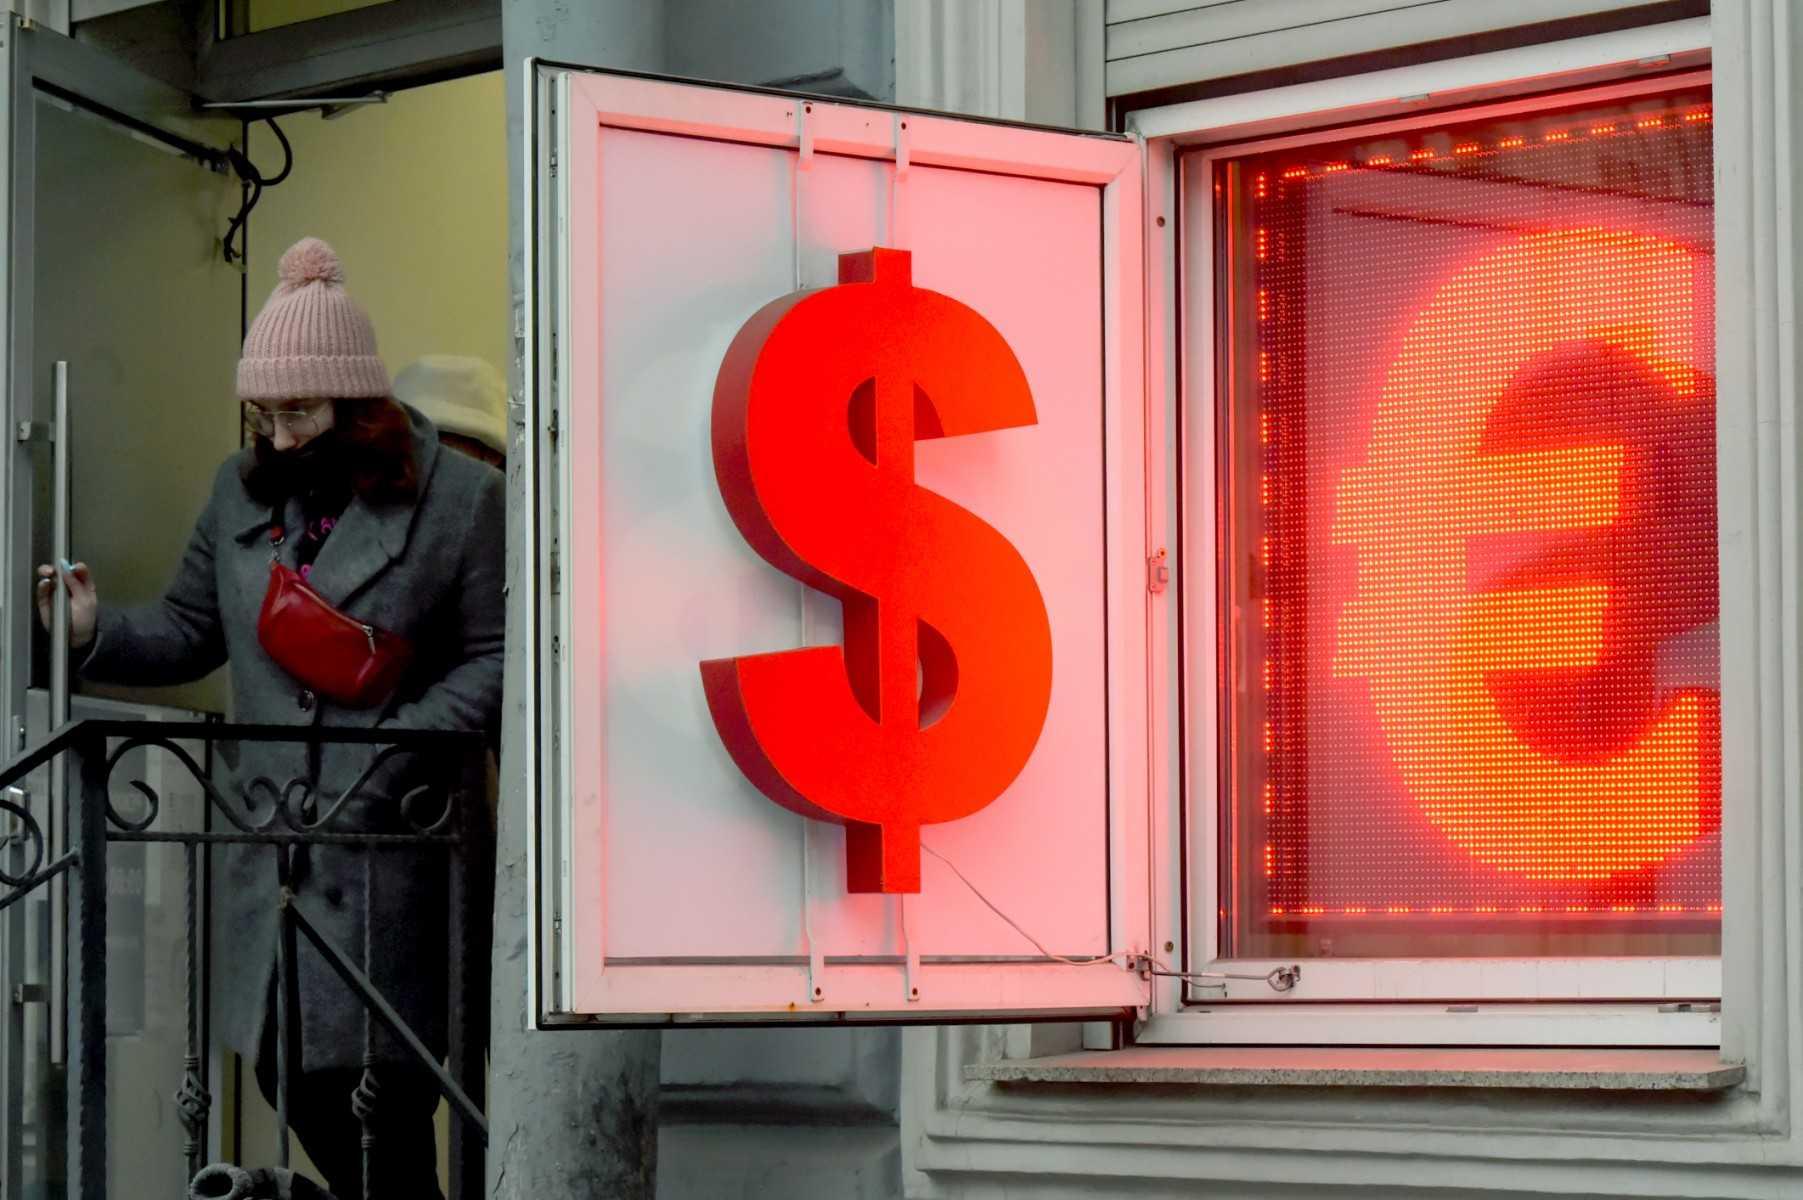 A woman leaves a currency exchange office displaying the US dollar and the euro signs in Saint Petersburg on March 2. Photo: AFP